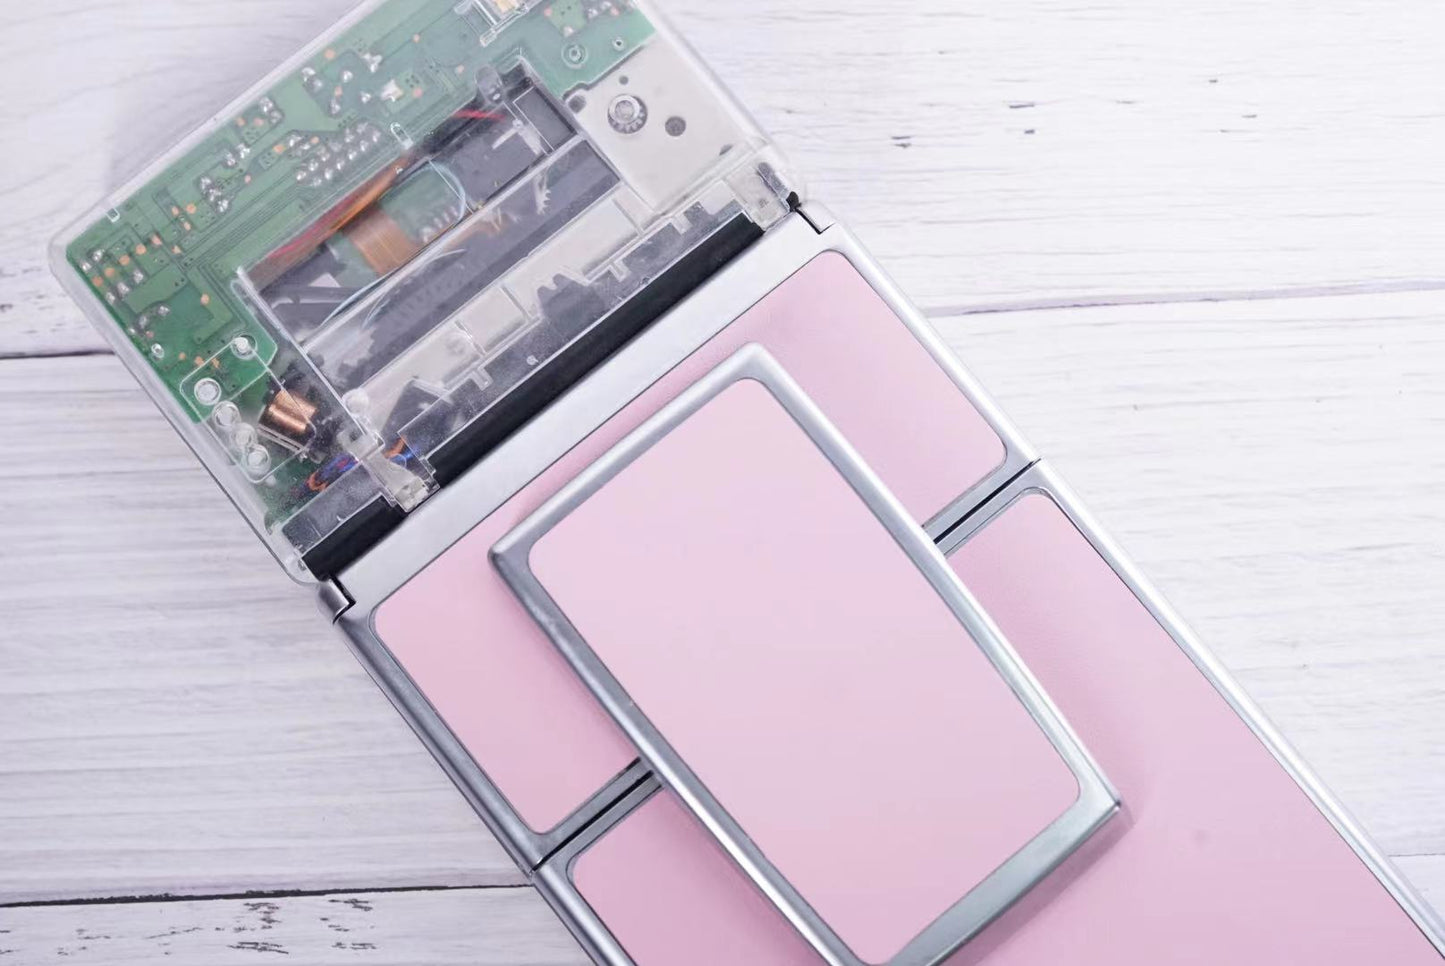 Polaoid SLR 690 PINK Custom Edition transparent  and sliver body